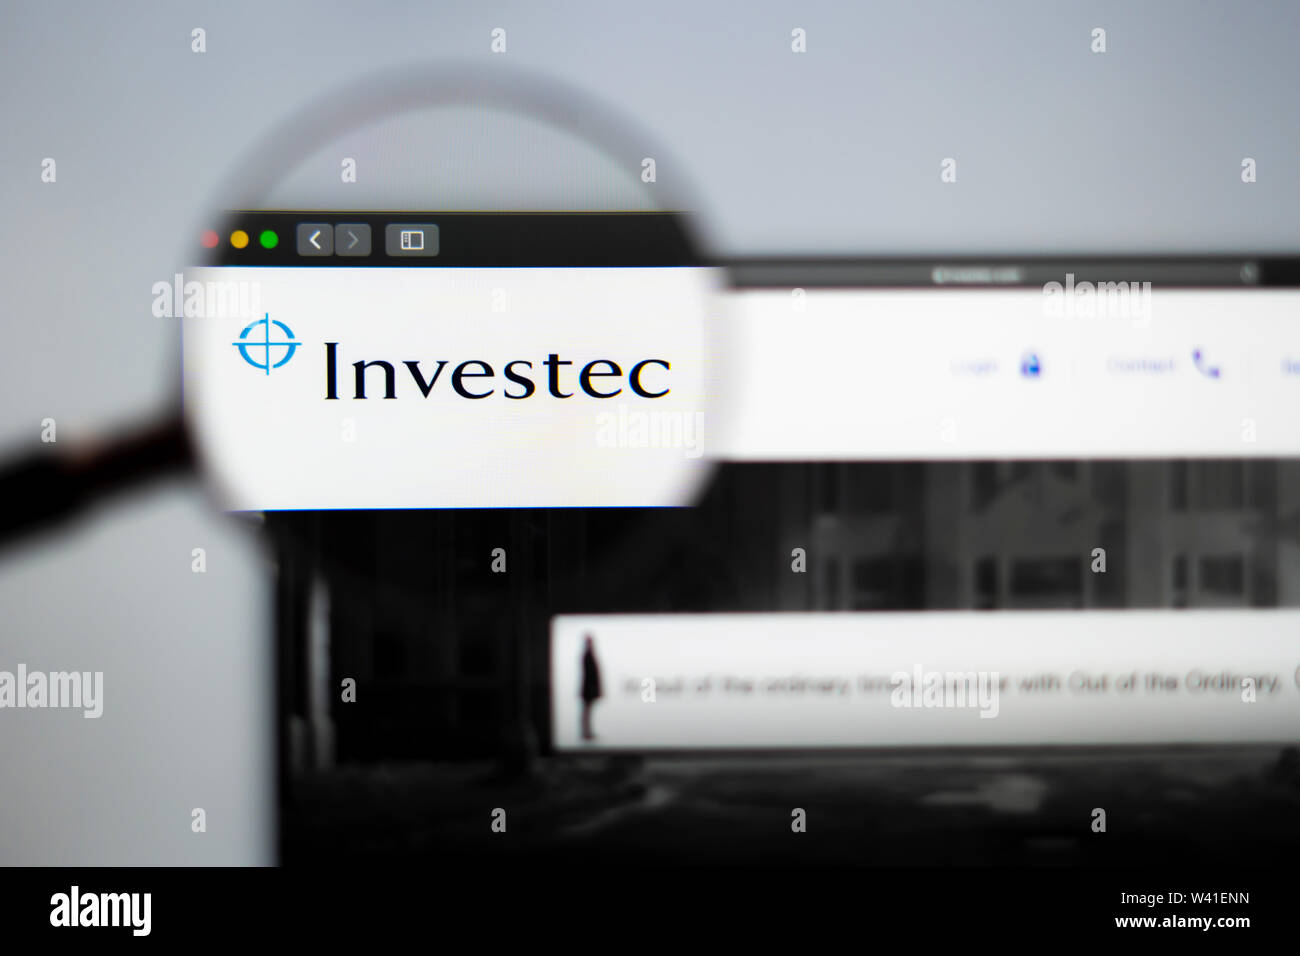 Investec company website homepage. Close up of Investec logo. Can be used as illustrative for news media, marketing or business concept. Stock Photo